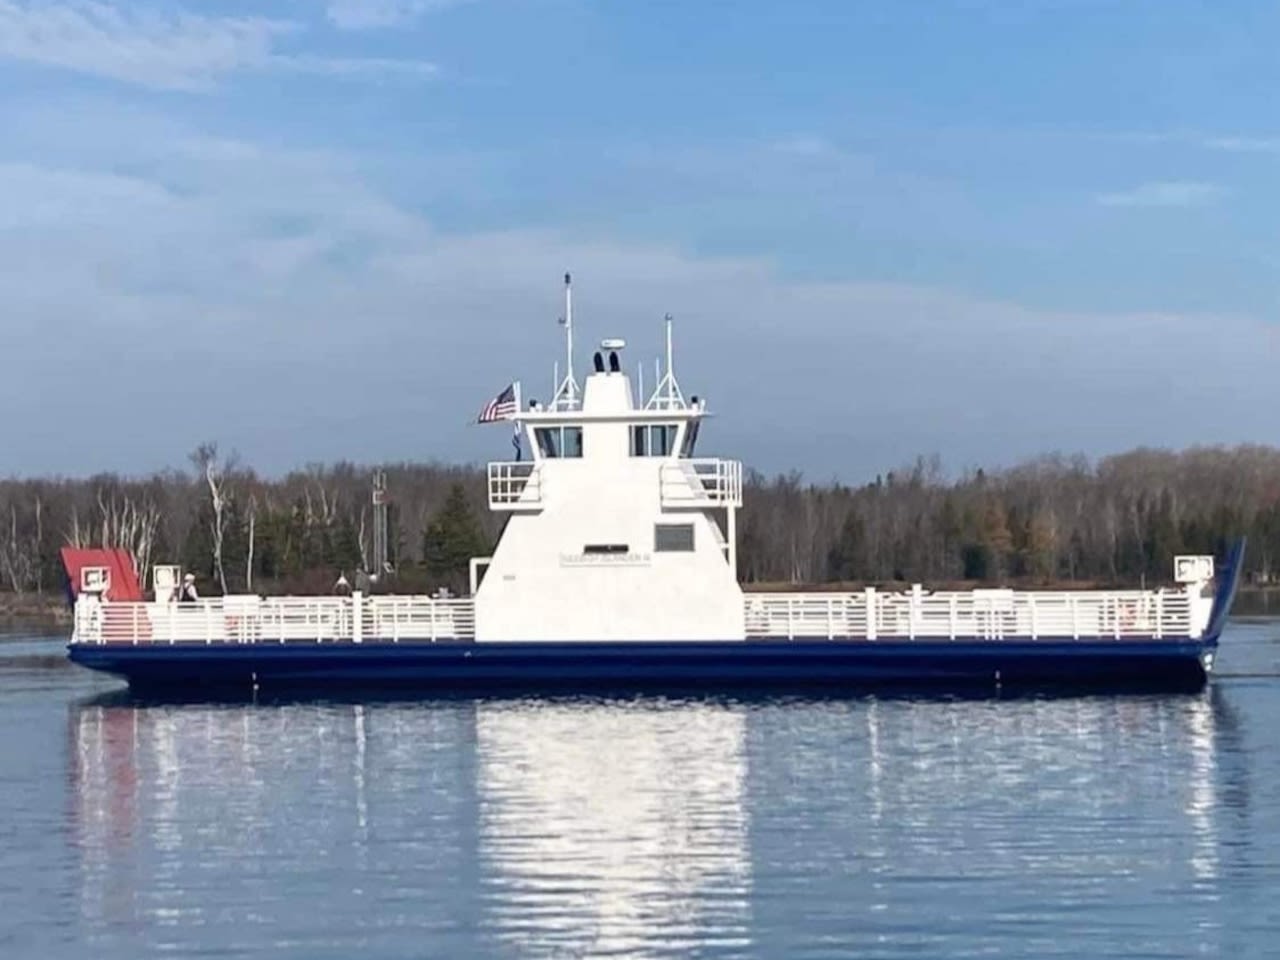 Ferry service cuts approved for Northern Michigan island amid protests